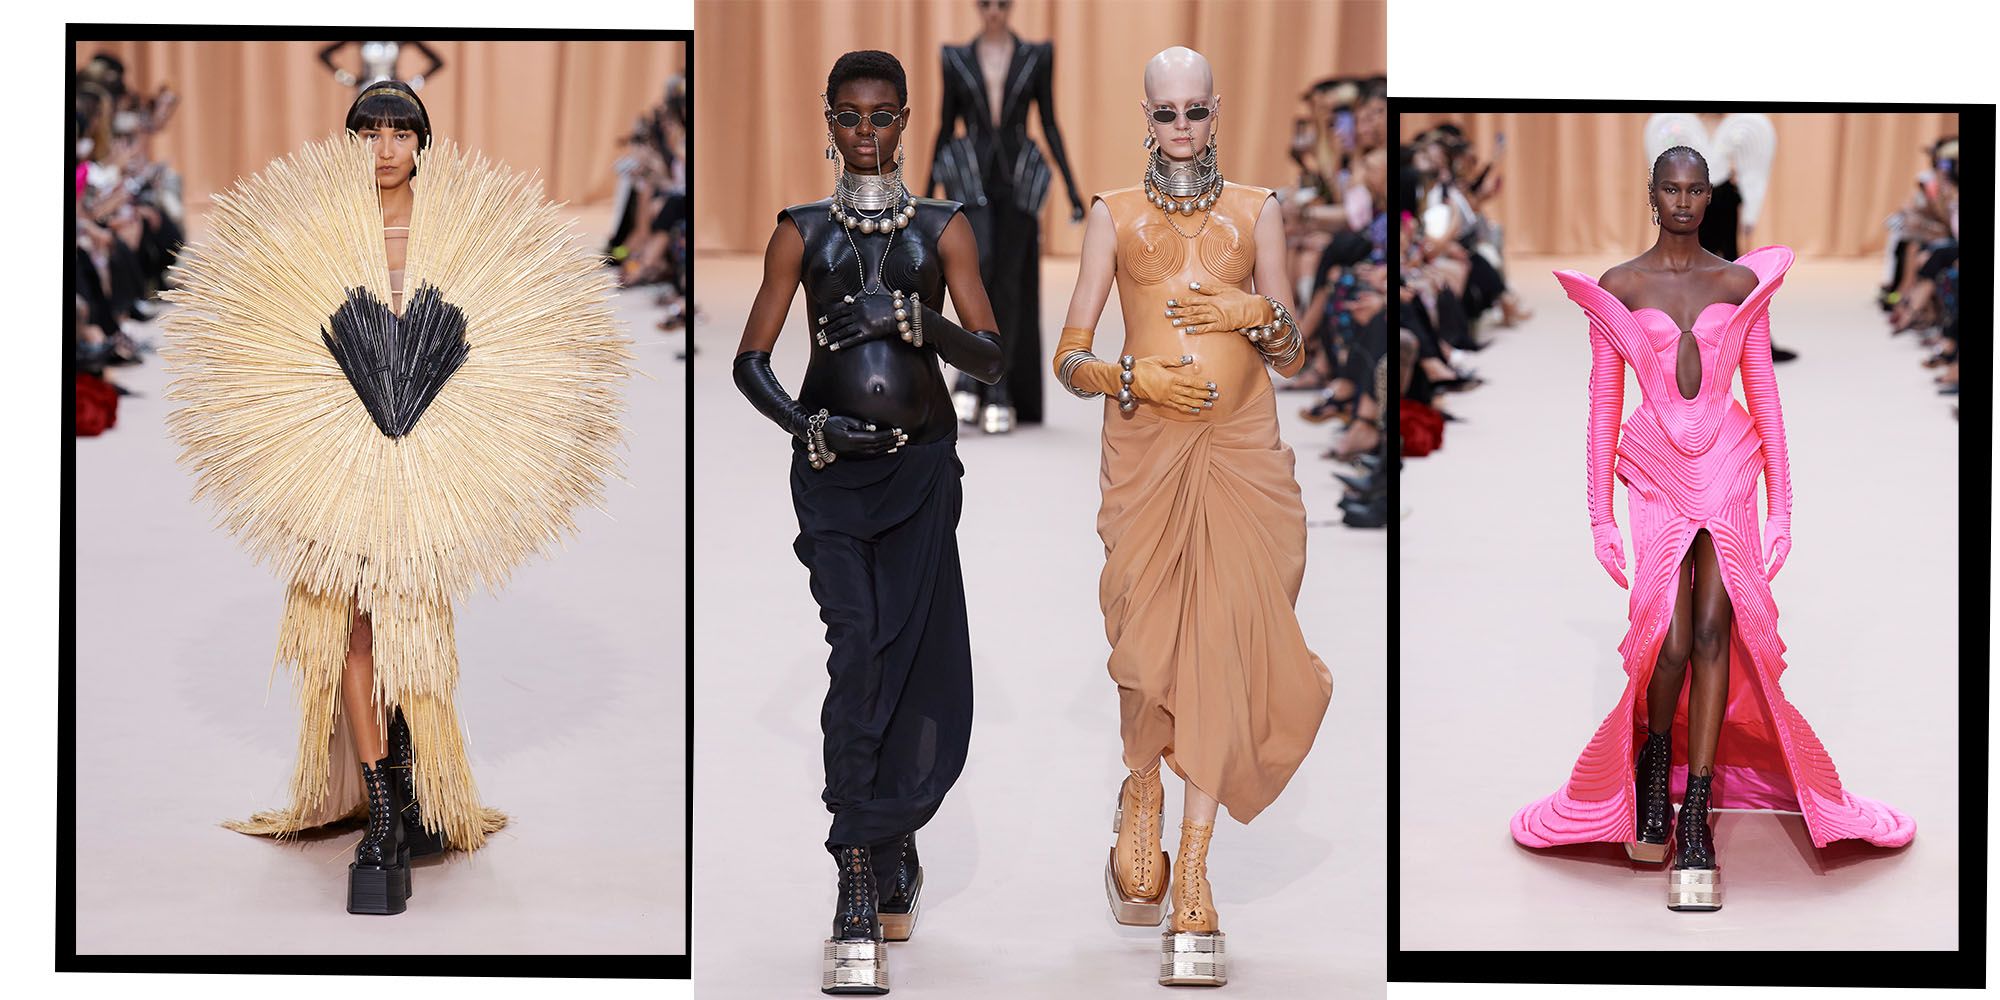 Olivier Rousteing Sends Human Pin Cushions, Conical Bras And Moulded Baby  Bumps Down The Runway For Jean Paul Gaultier Couture